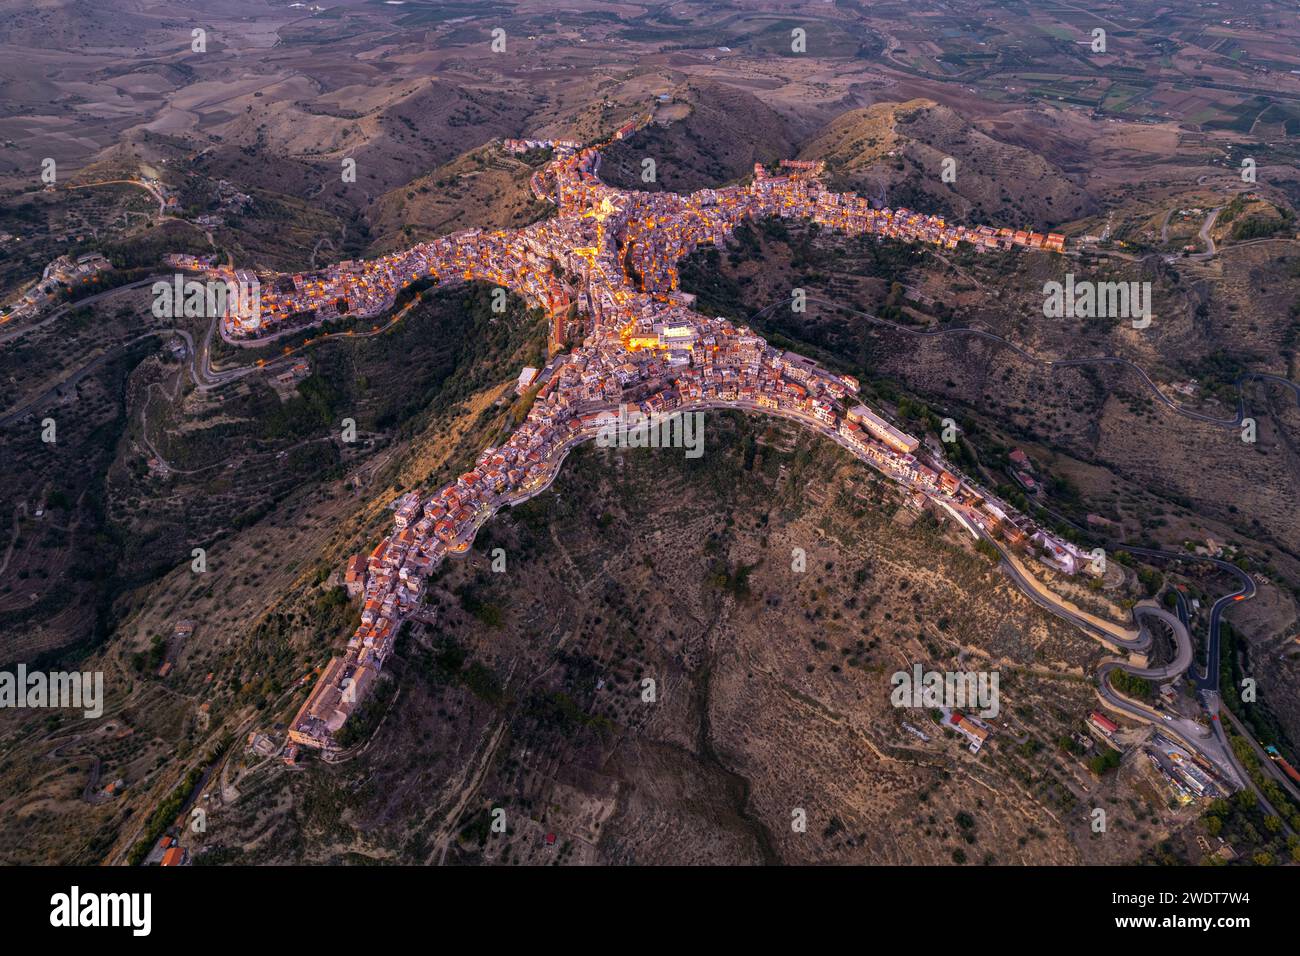 Aerial view of Centuripe, the human-shaped or star-shaped town, seen from above at dusk, Centuripe, Enna province, Sicily, Italy, Mediterranean Stock Photo